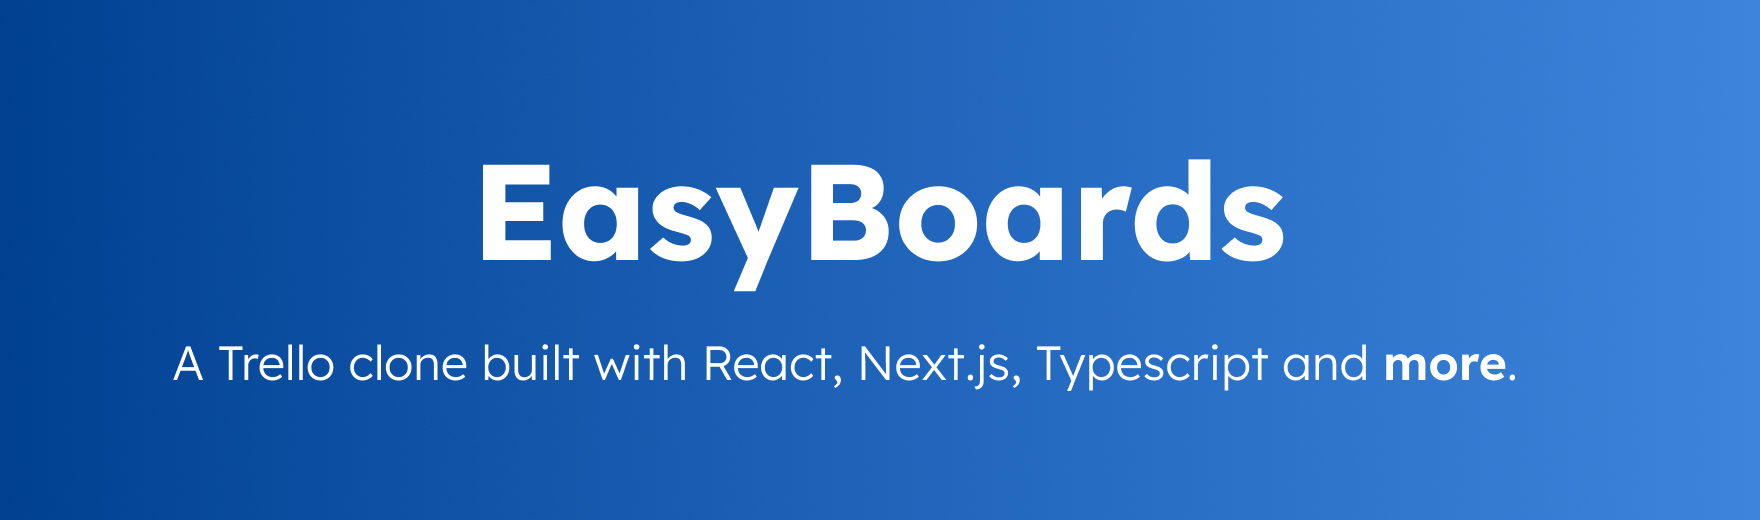 EasyBoards. A Trello clone developed with React, Next.js, Typescript and more.